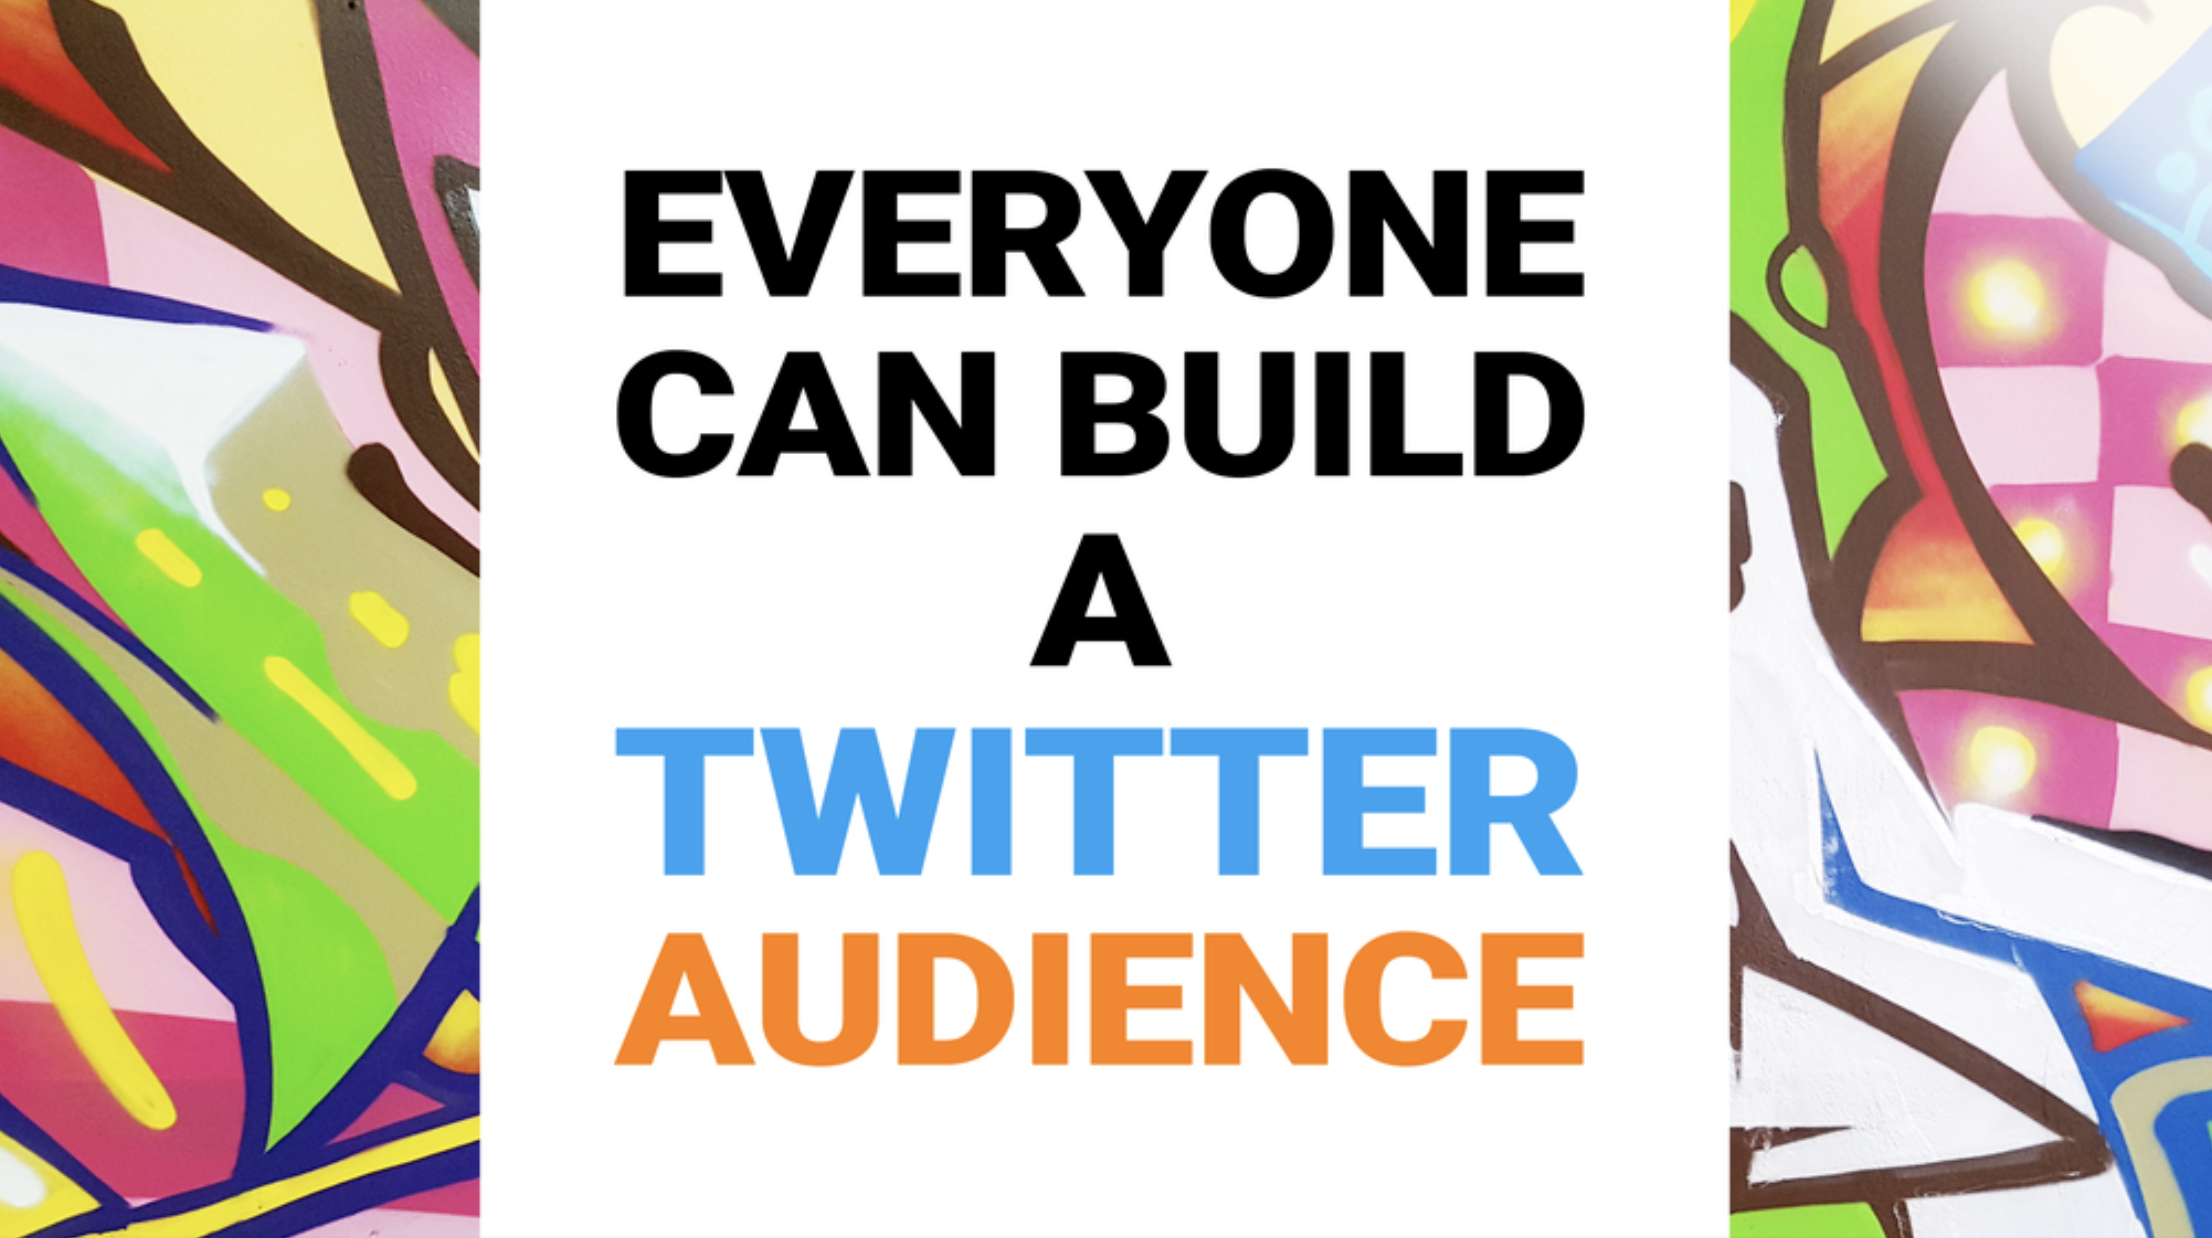 Everyone can build a twitter audience